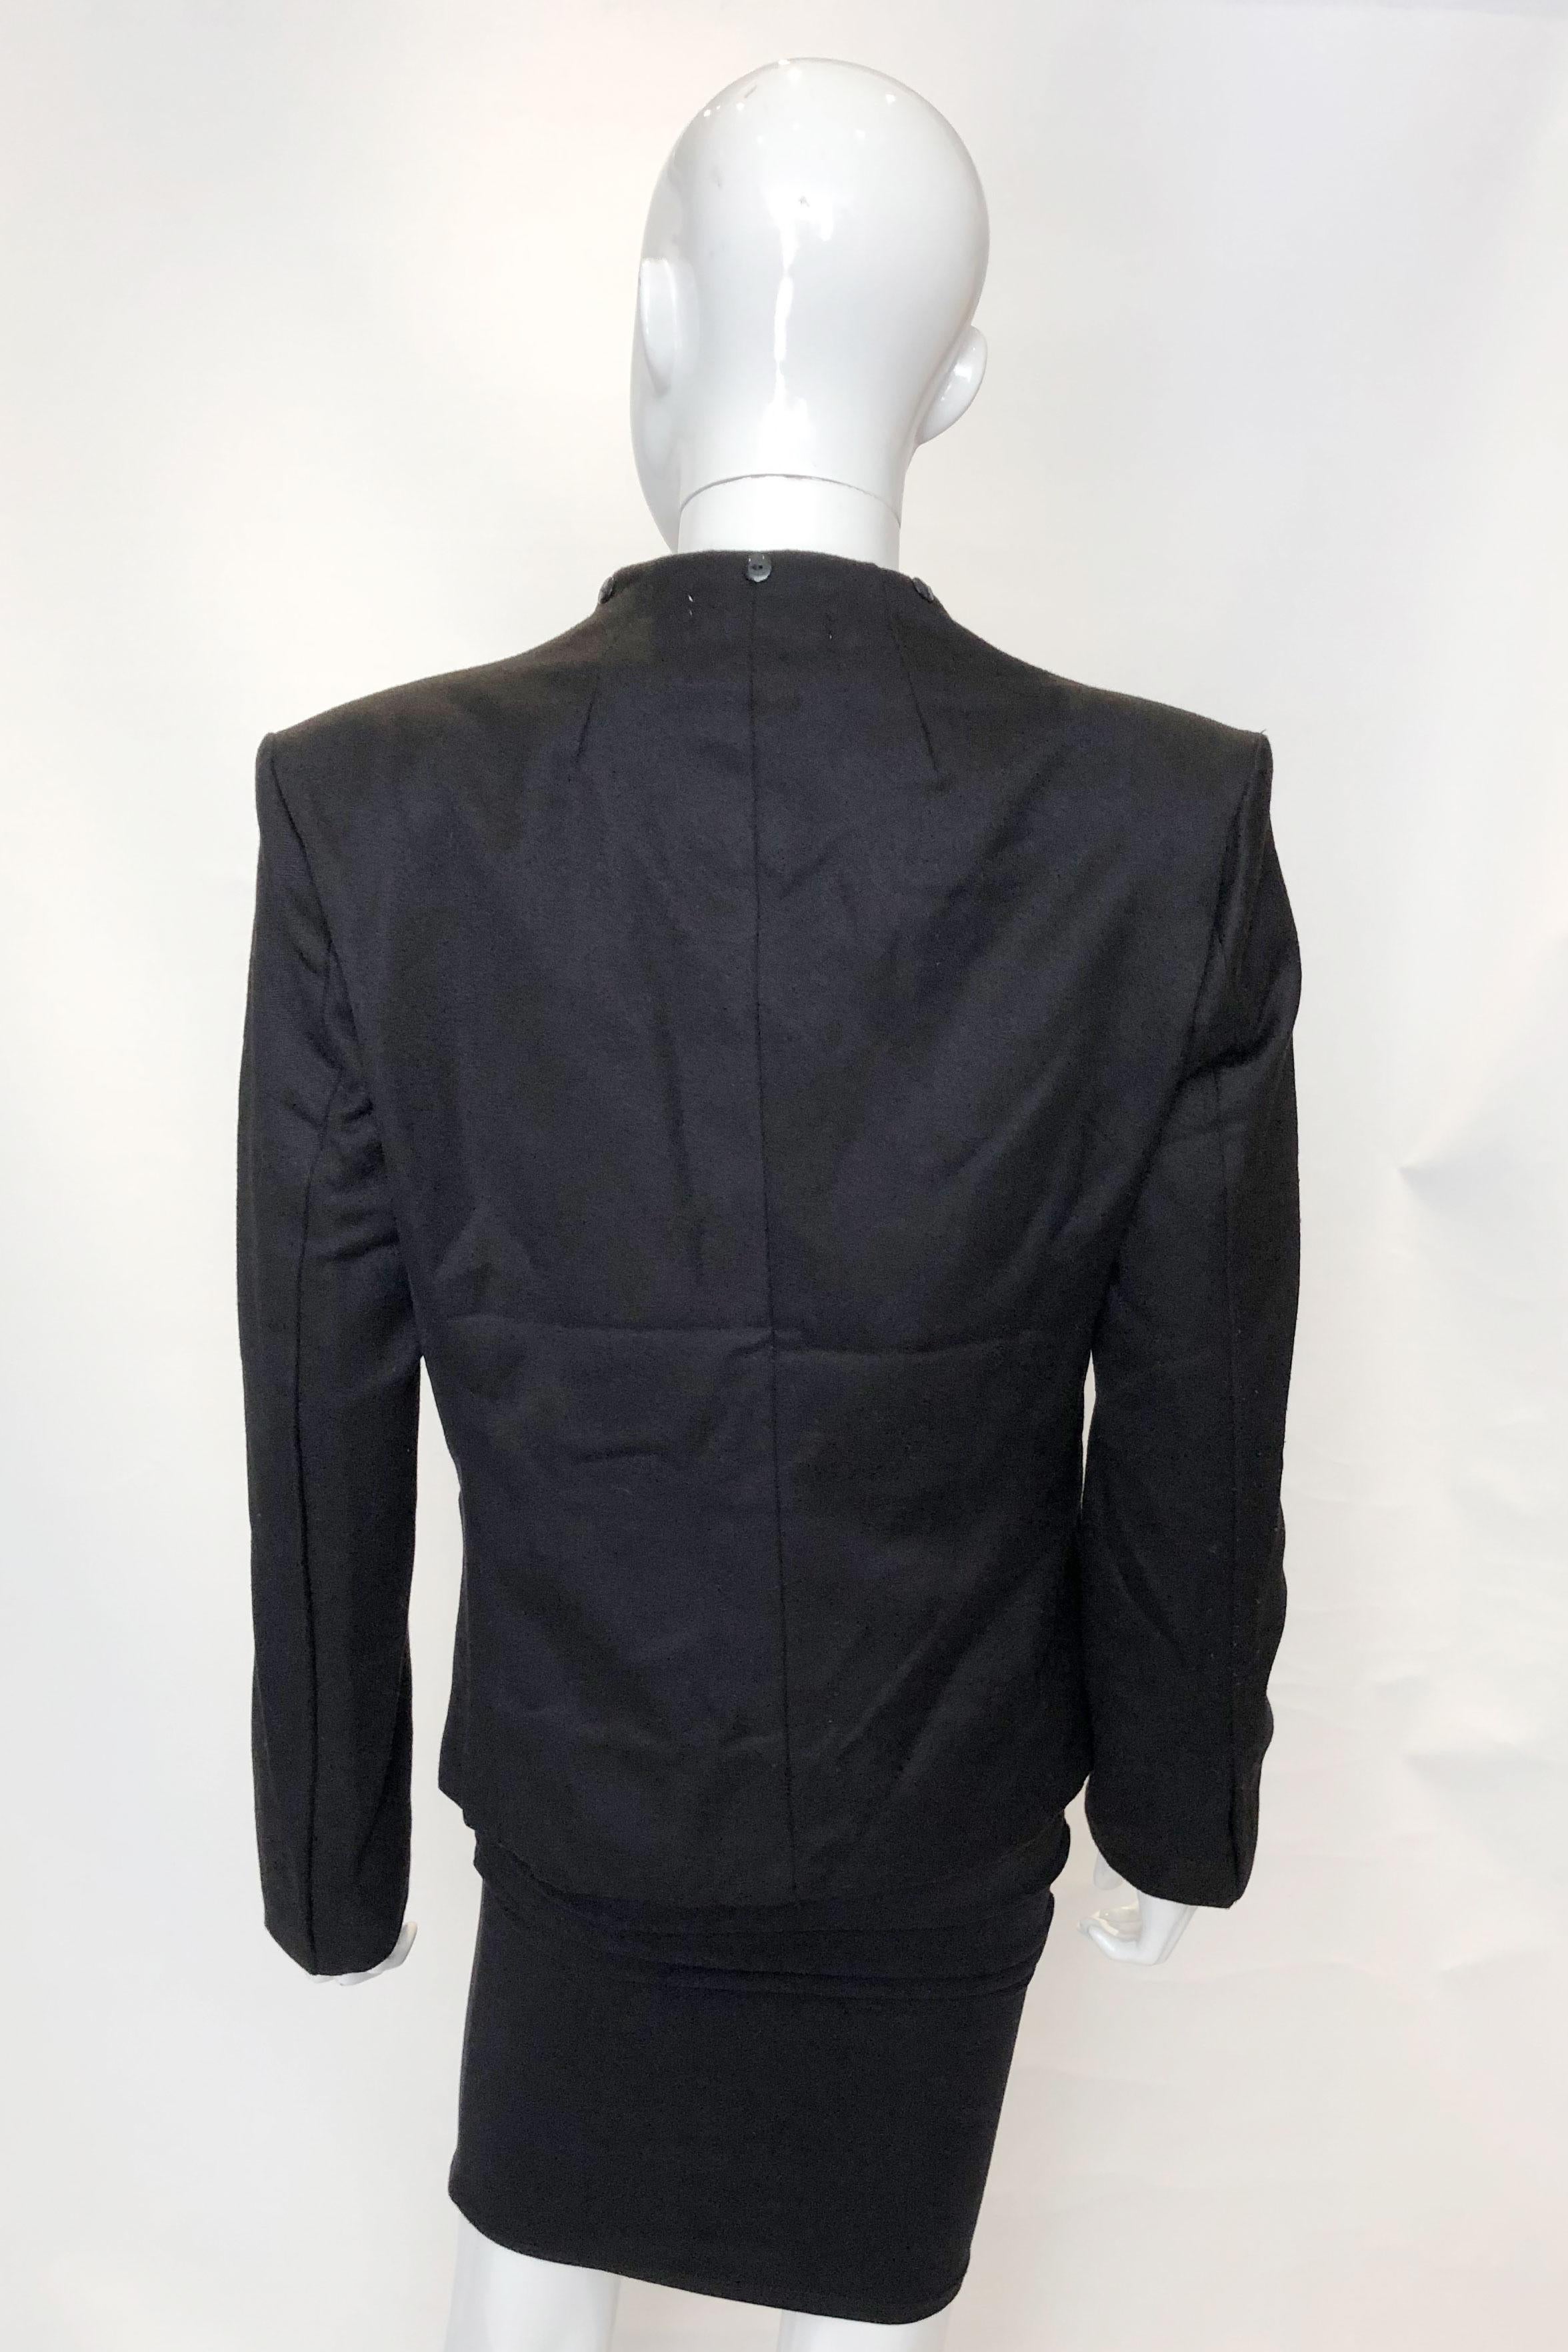 A chic jacket by Westwood London. This wool jacket is fully lined and has a cut away collar with buttons for fastening a collar /scarf. Alternatively they can easily be removed. 